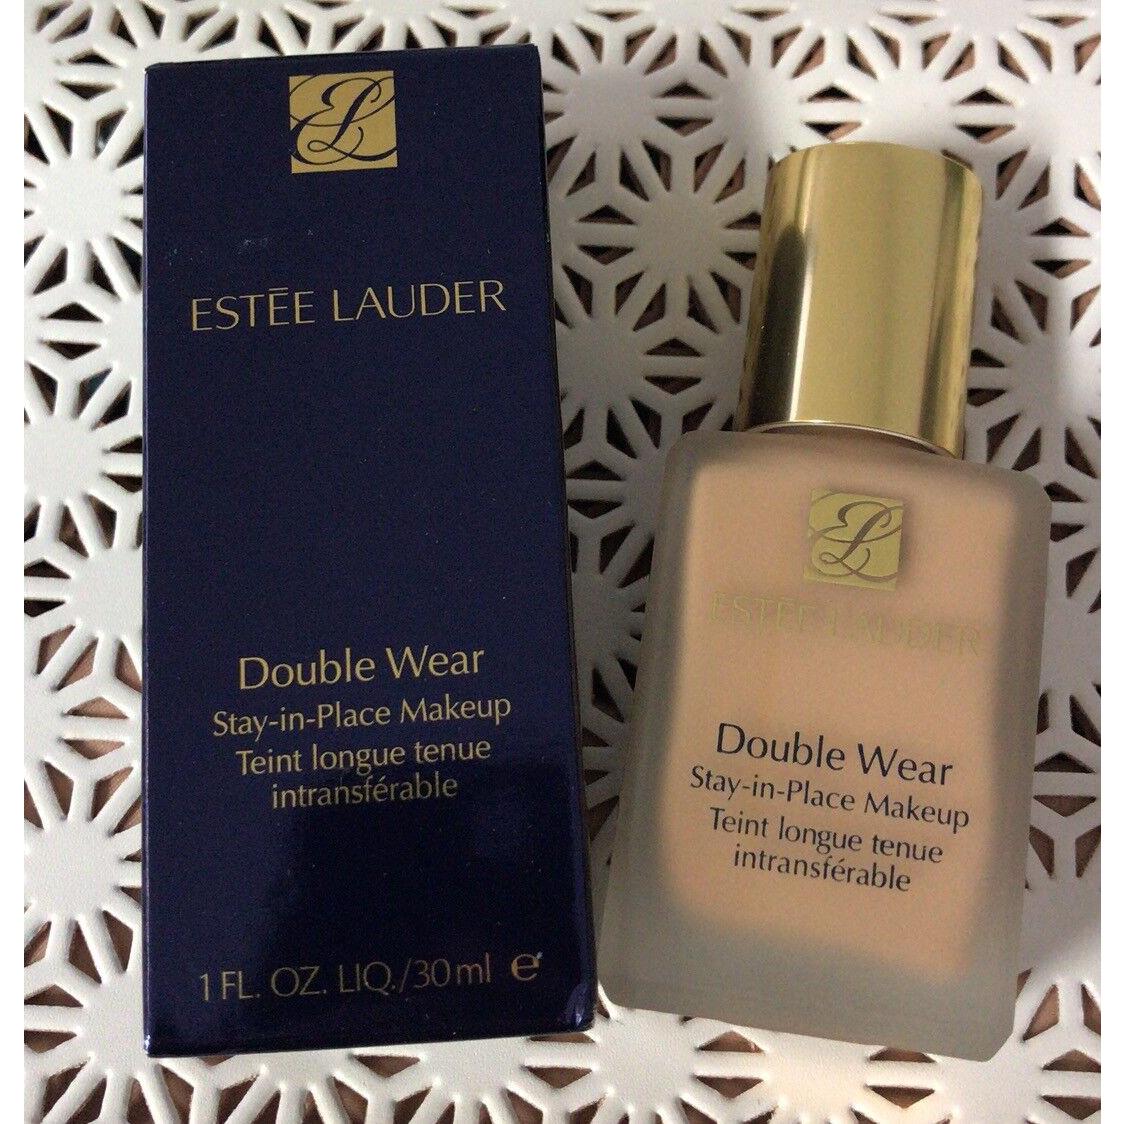 Estee Lauder Double Wear Stay-in-place Makeup Shade: 3W1 Tawny 1oz Full Size